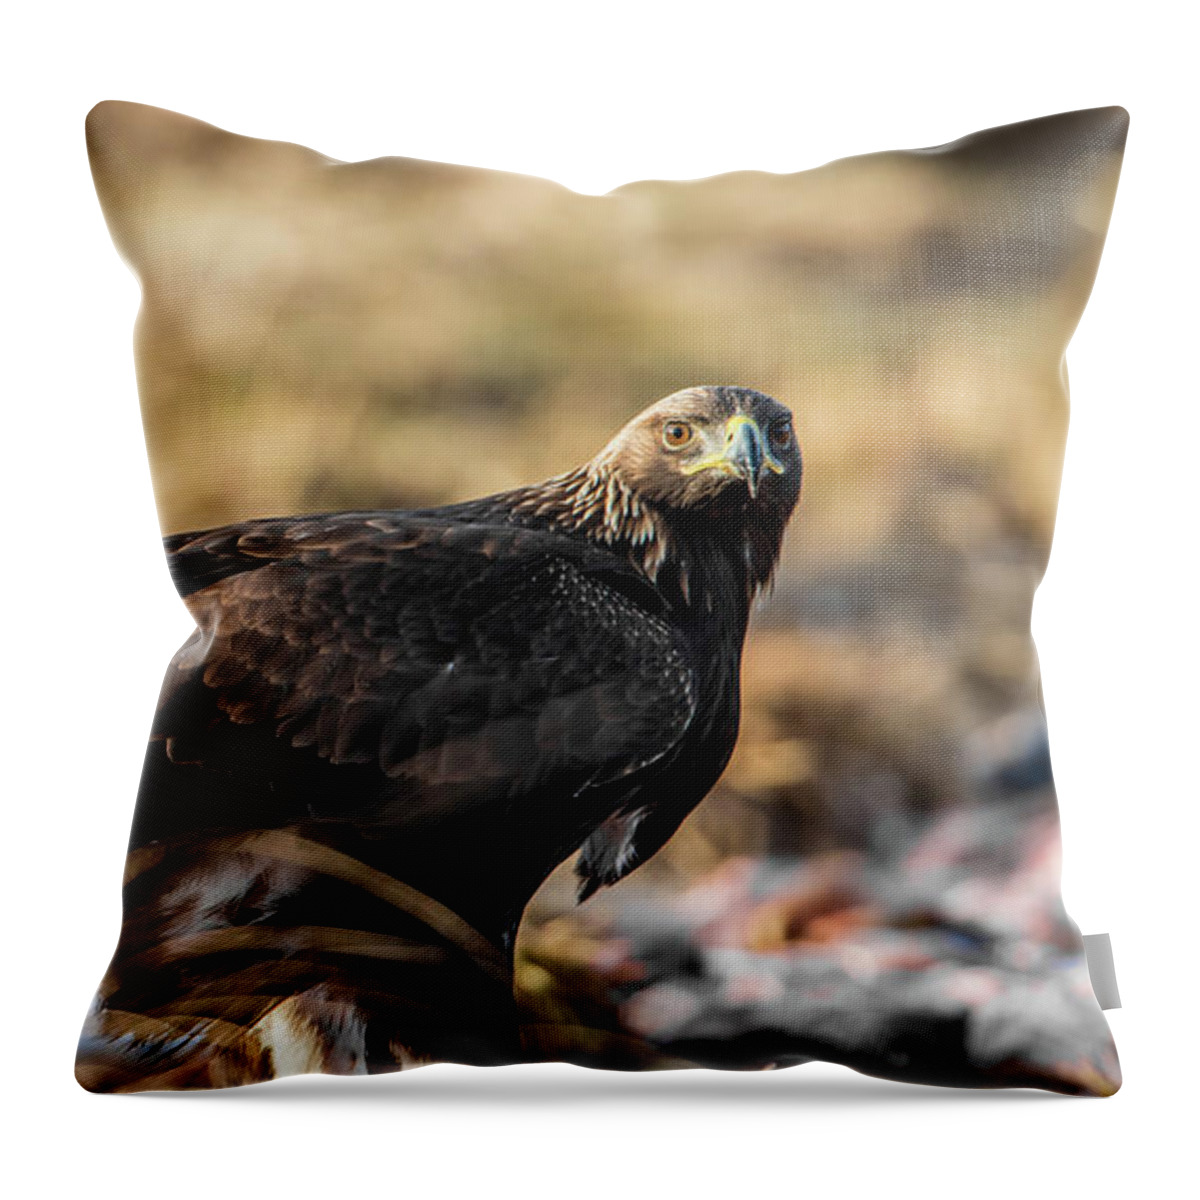 Golden Eagle Throw Pillow featuring the photograph Golden Eagle's Glance by Torbjorn Swenelius